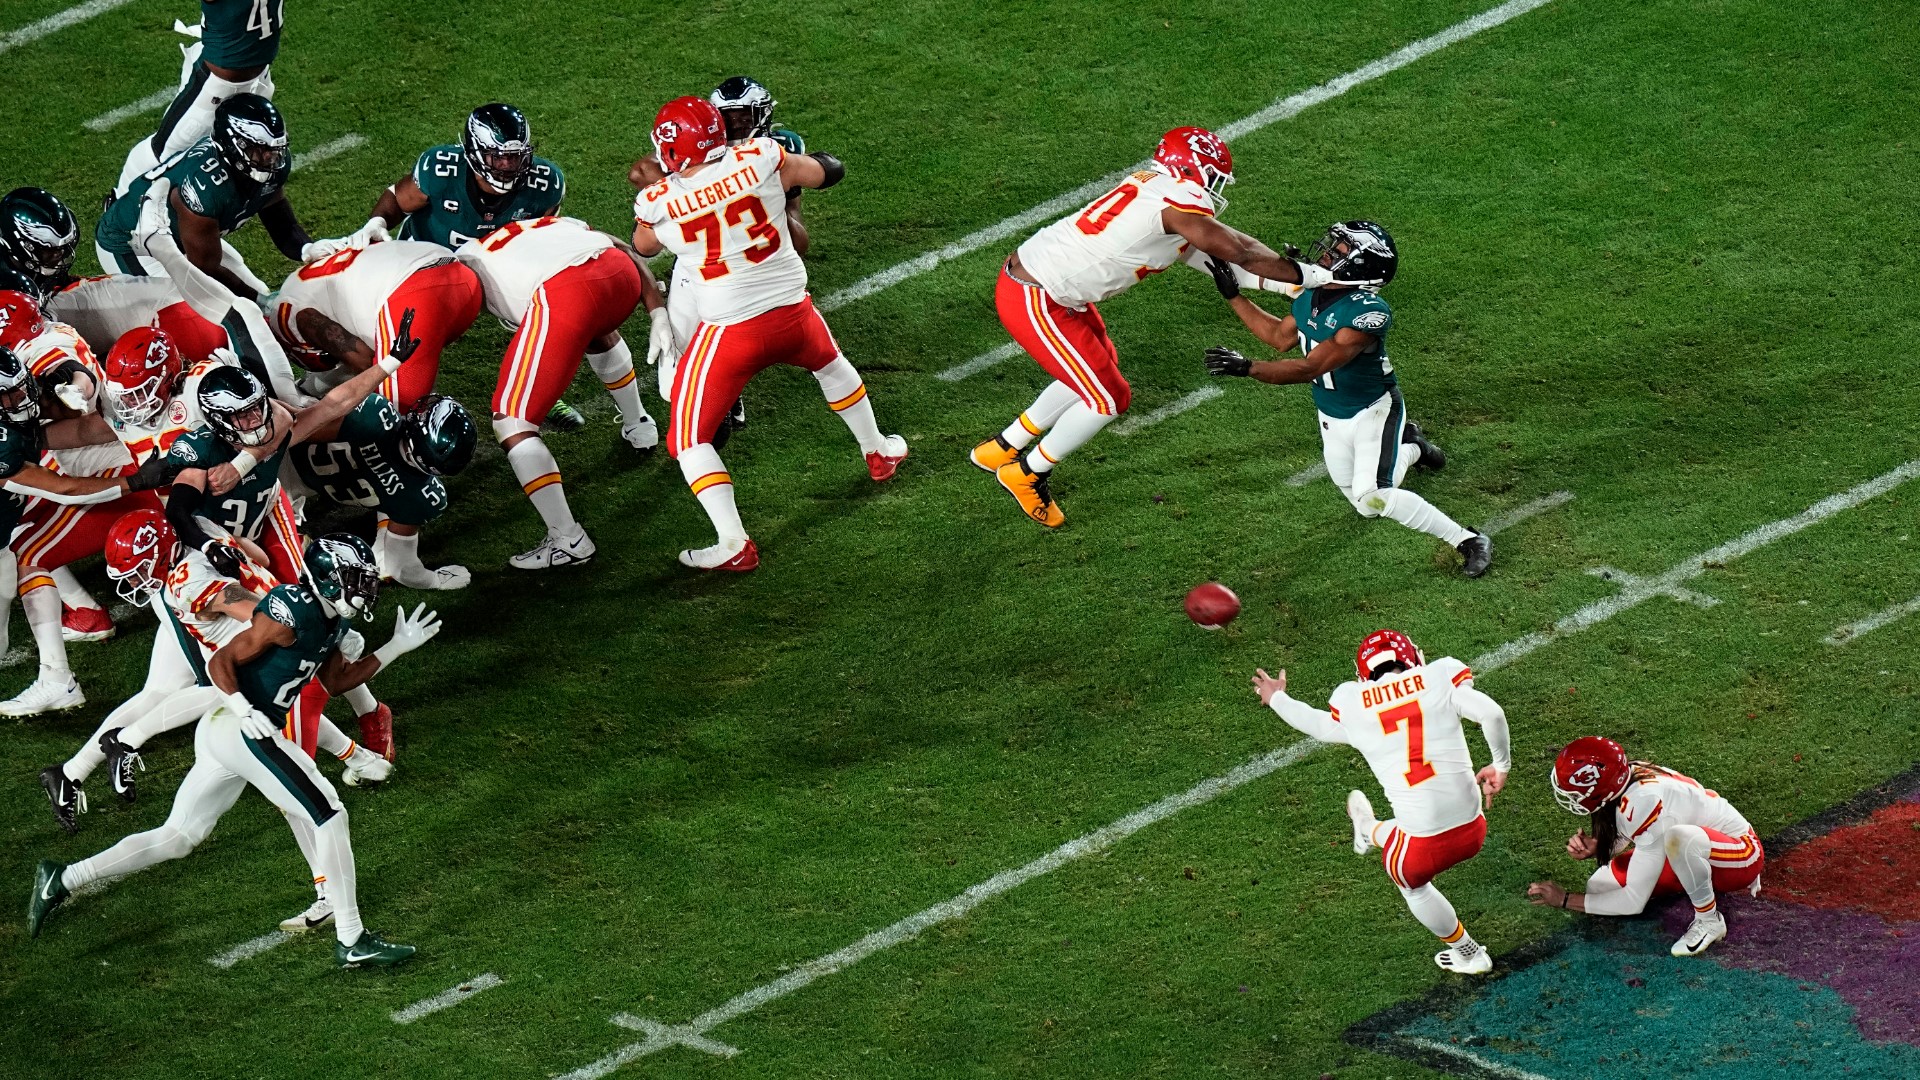 Butker knocked home the game-winning 27-yard field goal with just 11 seconds remaining in Super Bowl LVII to beat the Eagles.